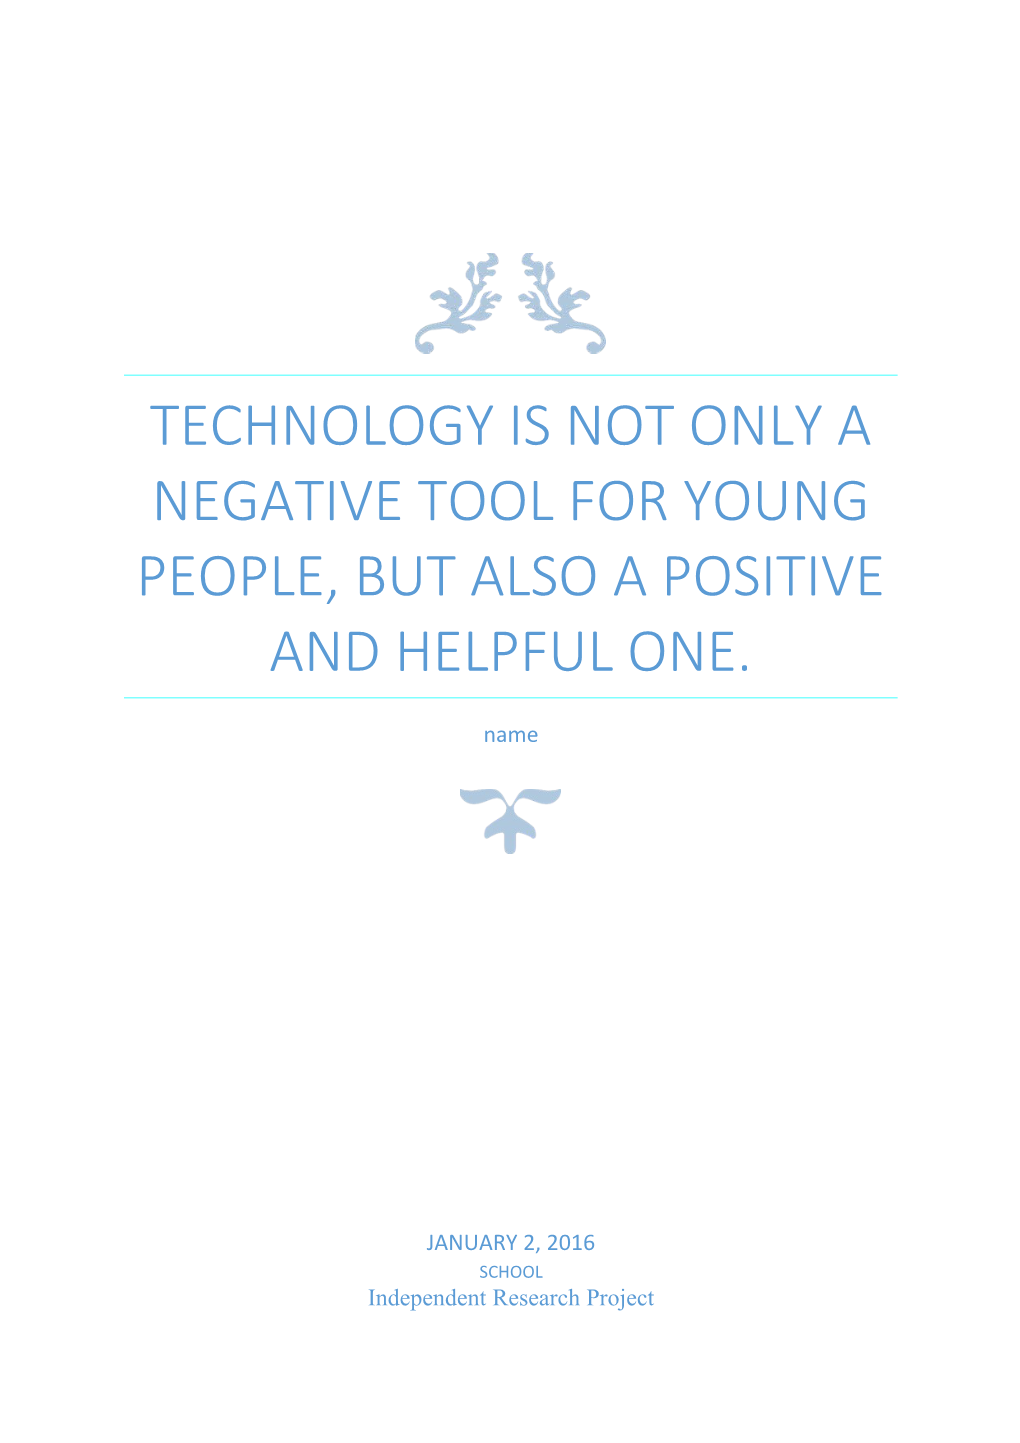 TECHNOLOGY IS NOT ONLY a NEGATIVE TOOL for YOUNG PEOPLE, but ALSO a POSITIVE and Helpful ONE